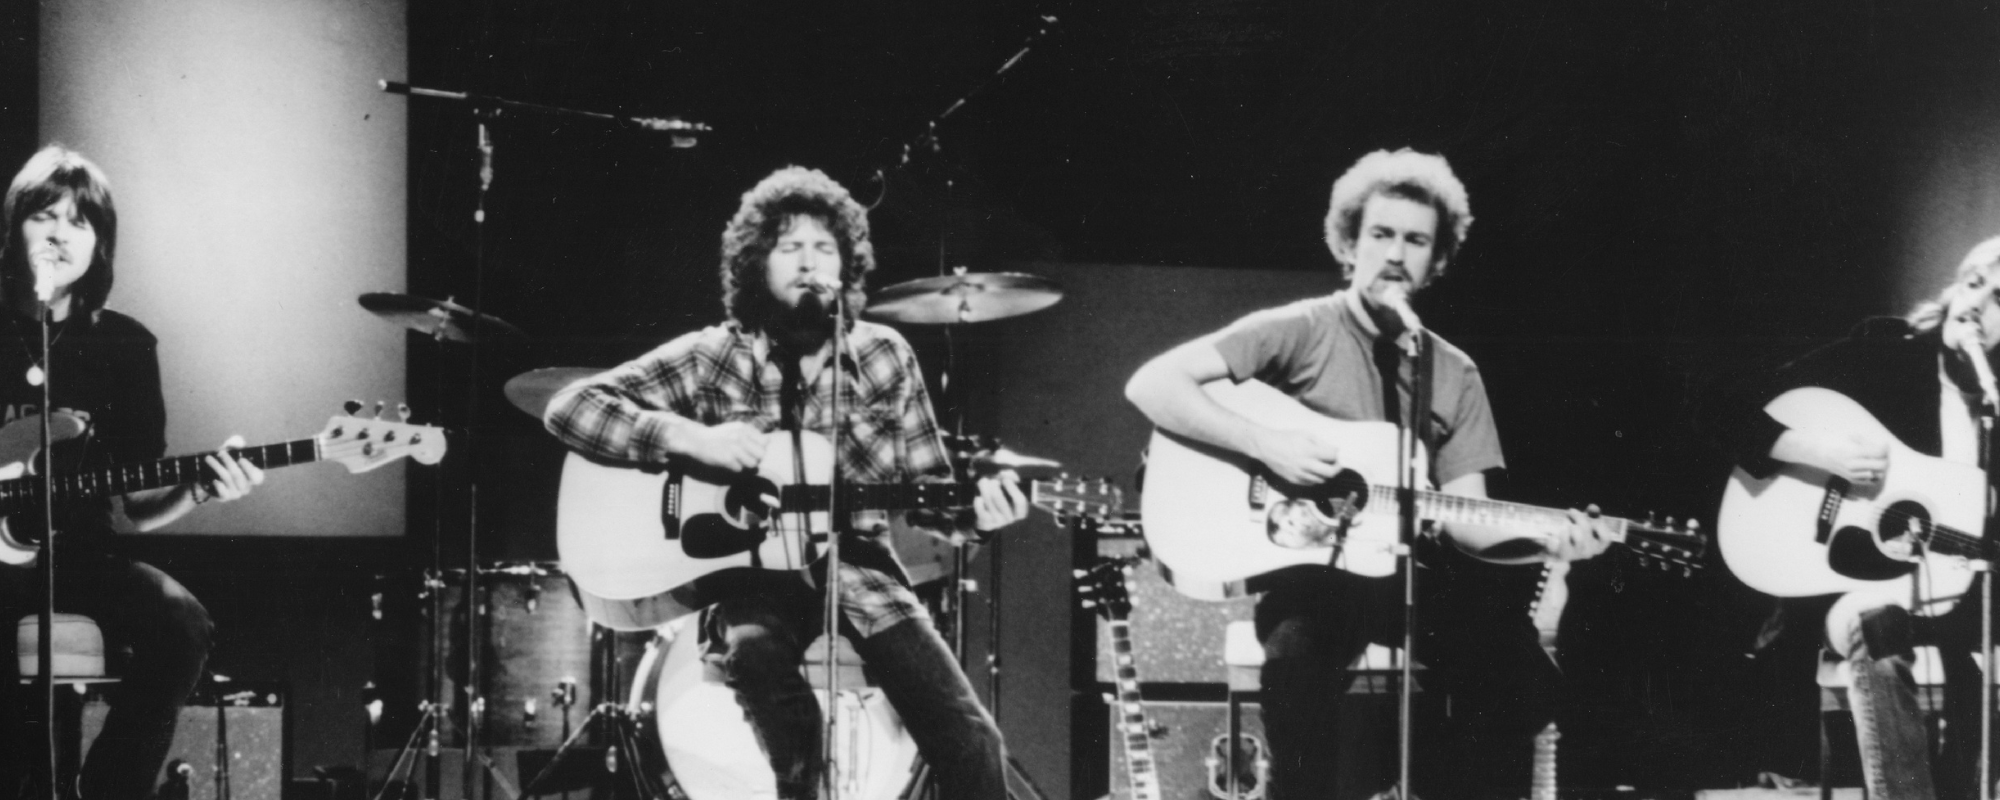 Behind the Meaning of Eagles’ “Victim of Love”